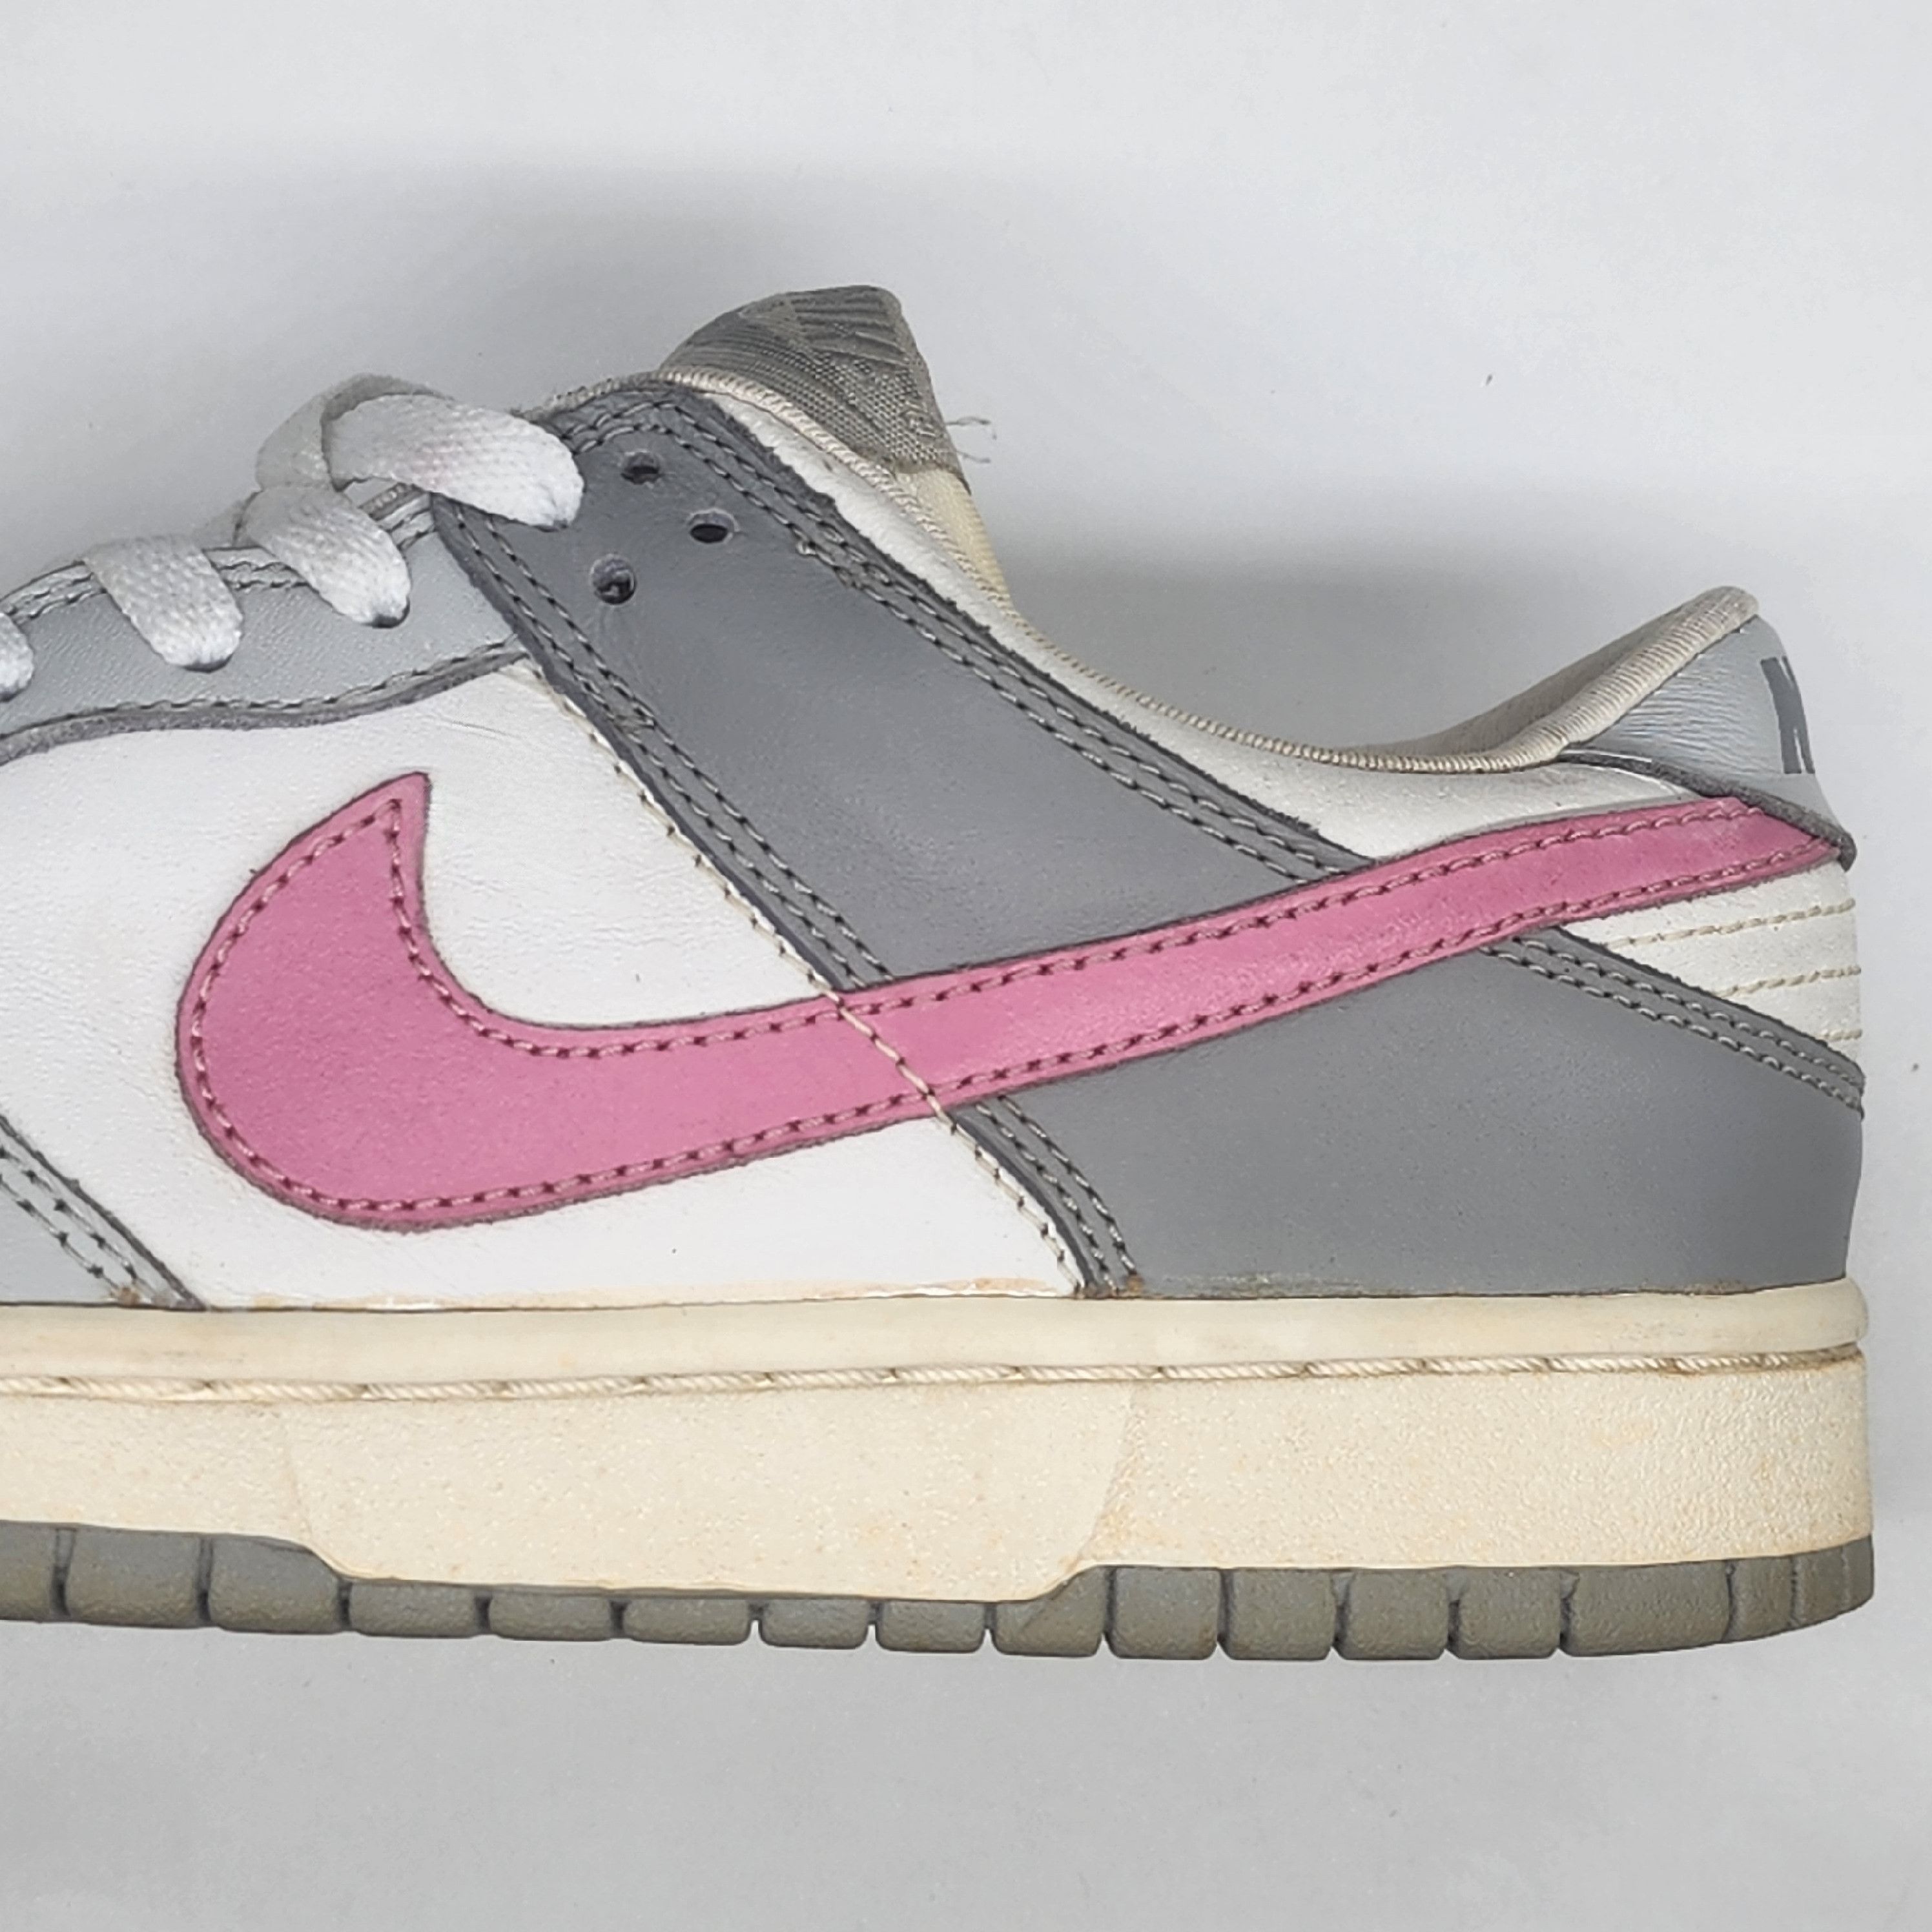 Nike - 2004 W's Dunk Low Pro Pink Neutral Gray - 12